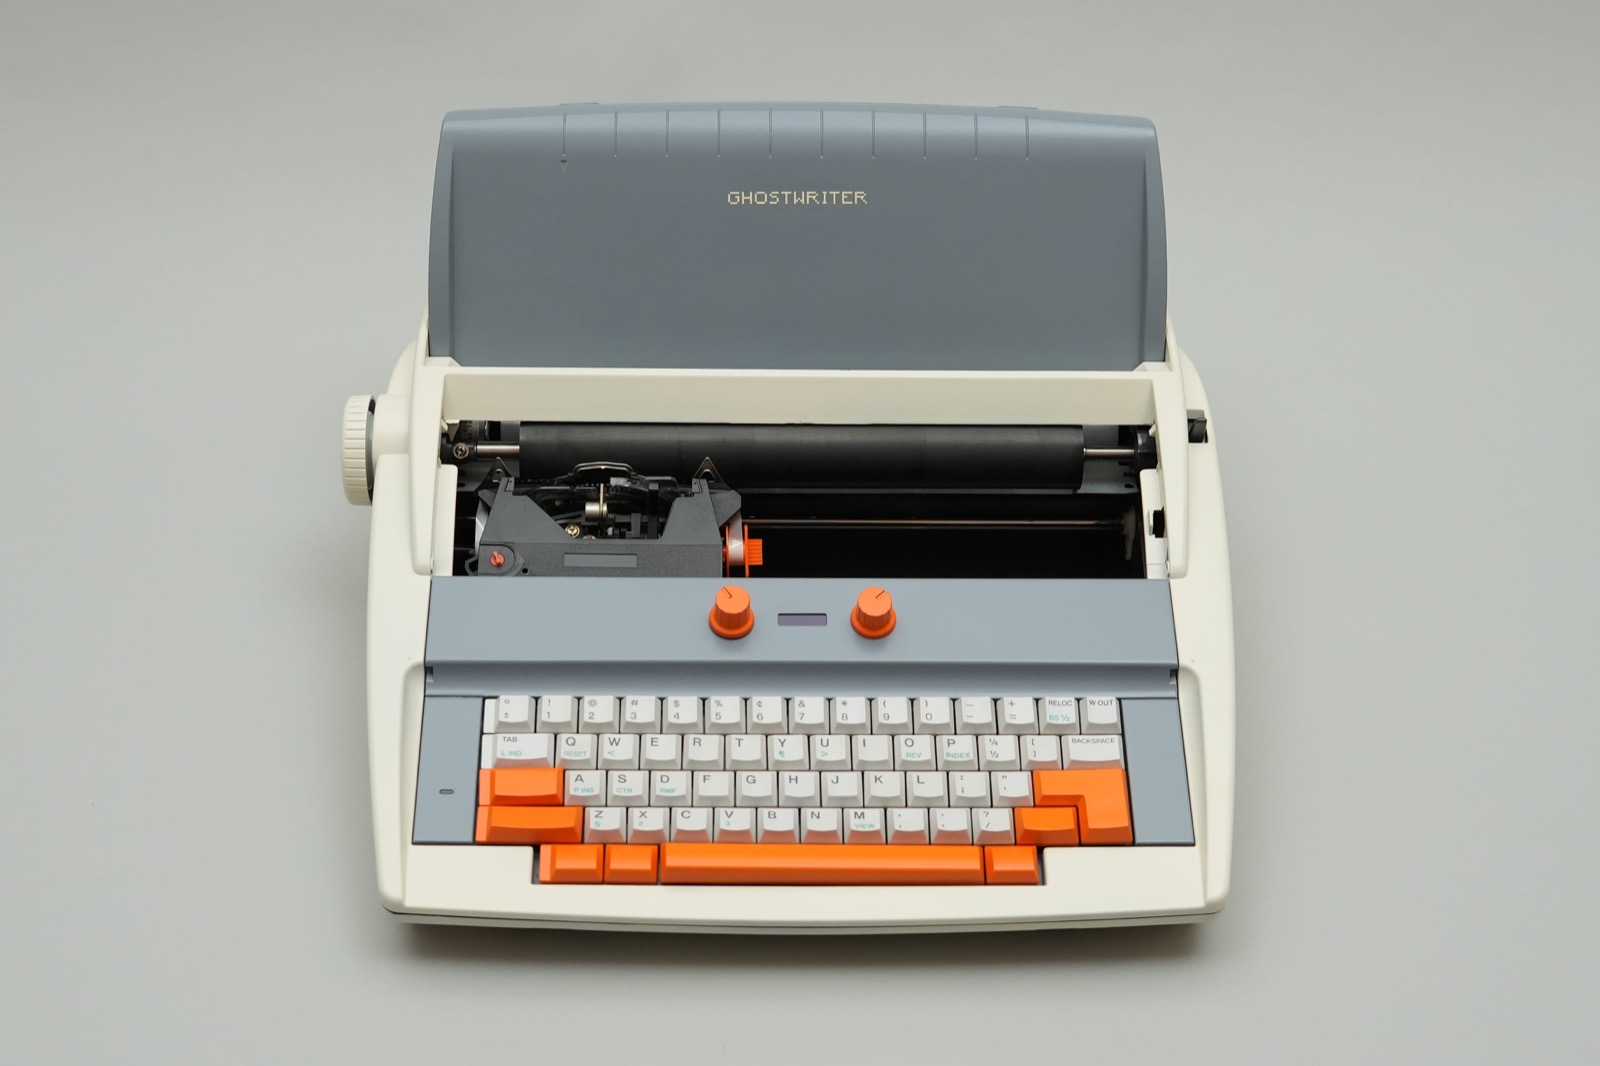 An enthusiast has created Ghostwriter, a unique AI typewriter that you can talk to